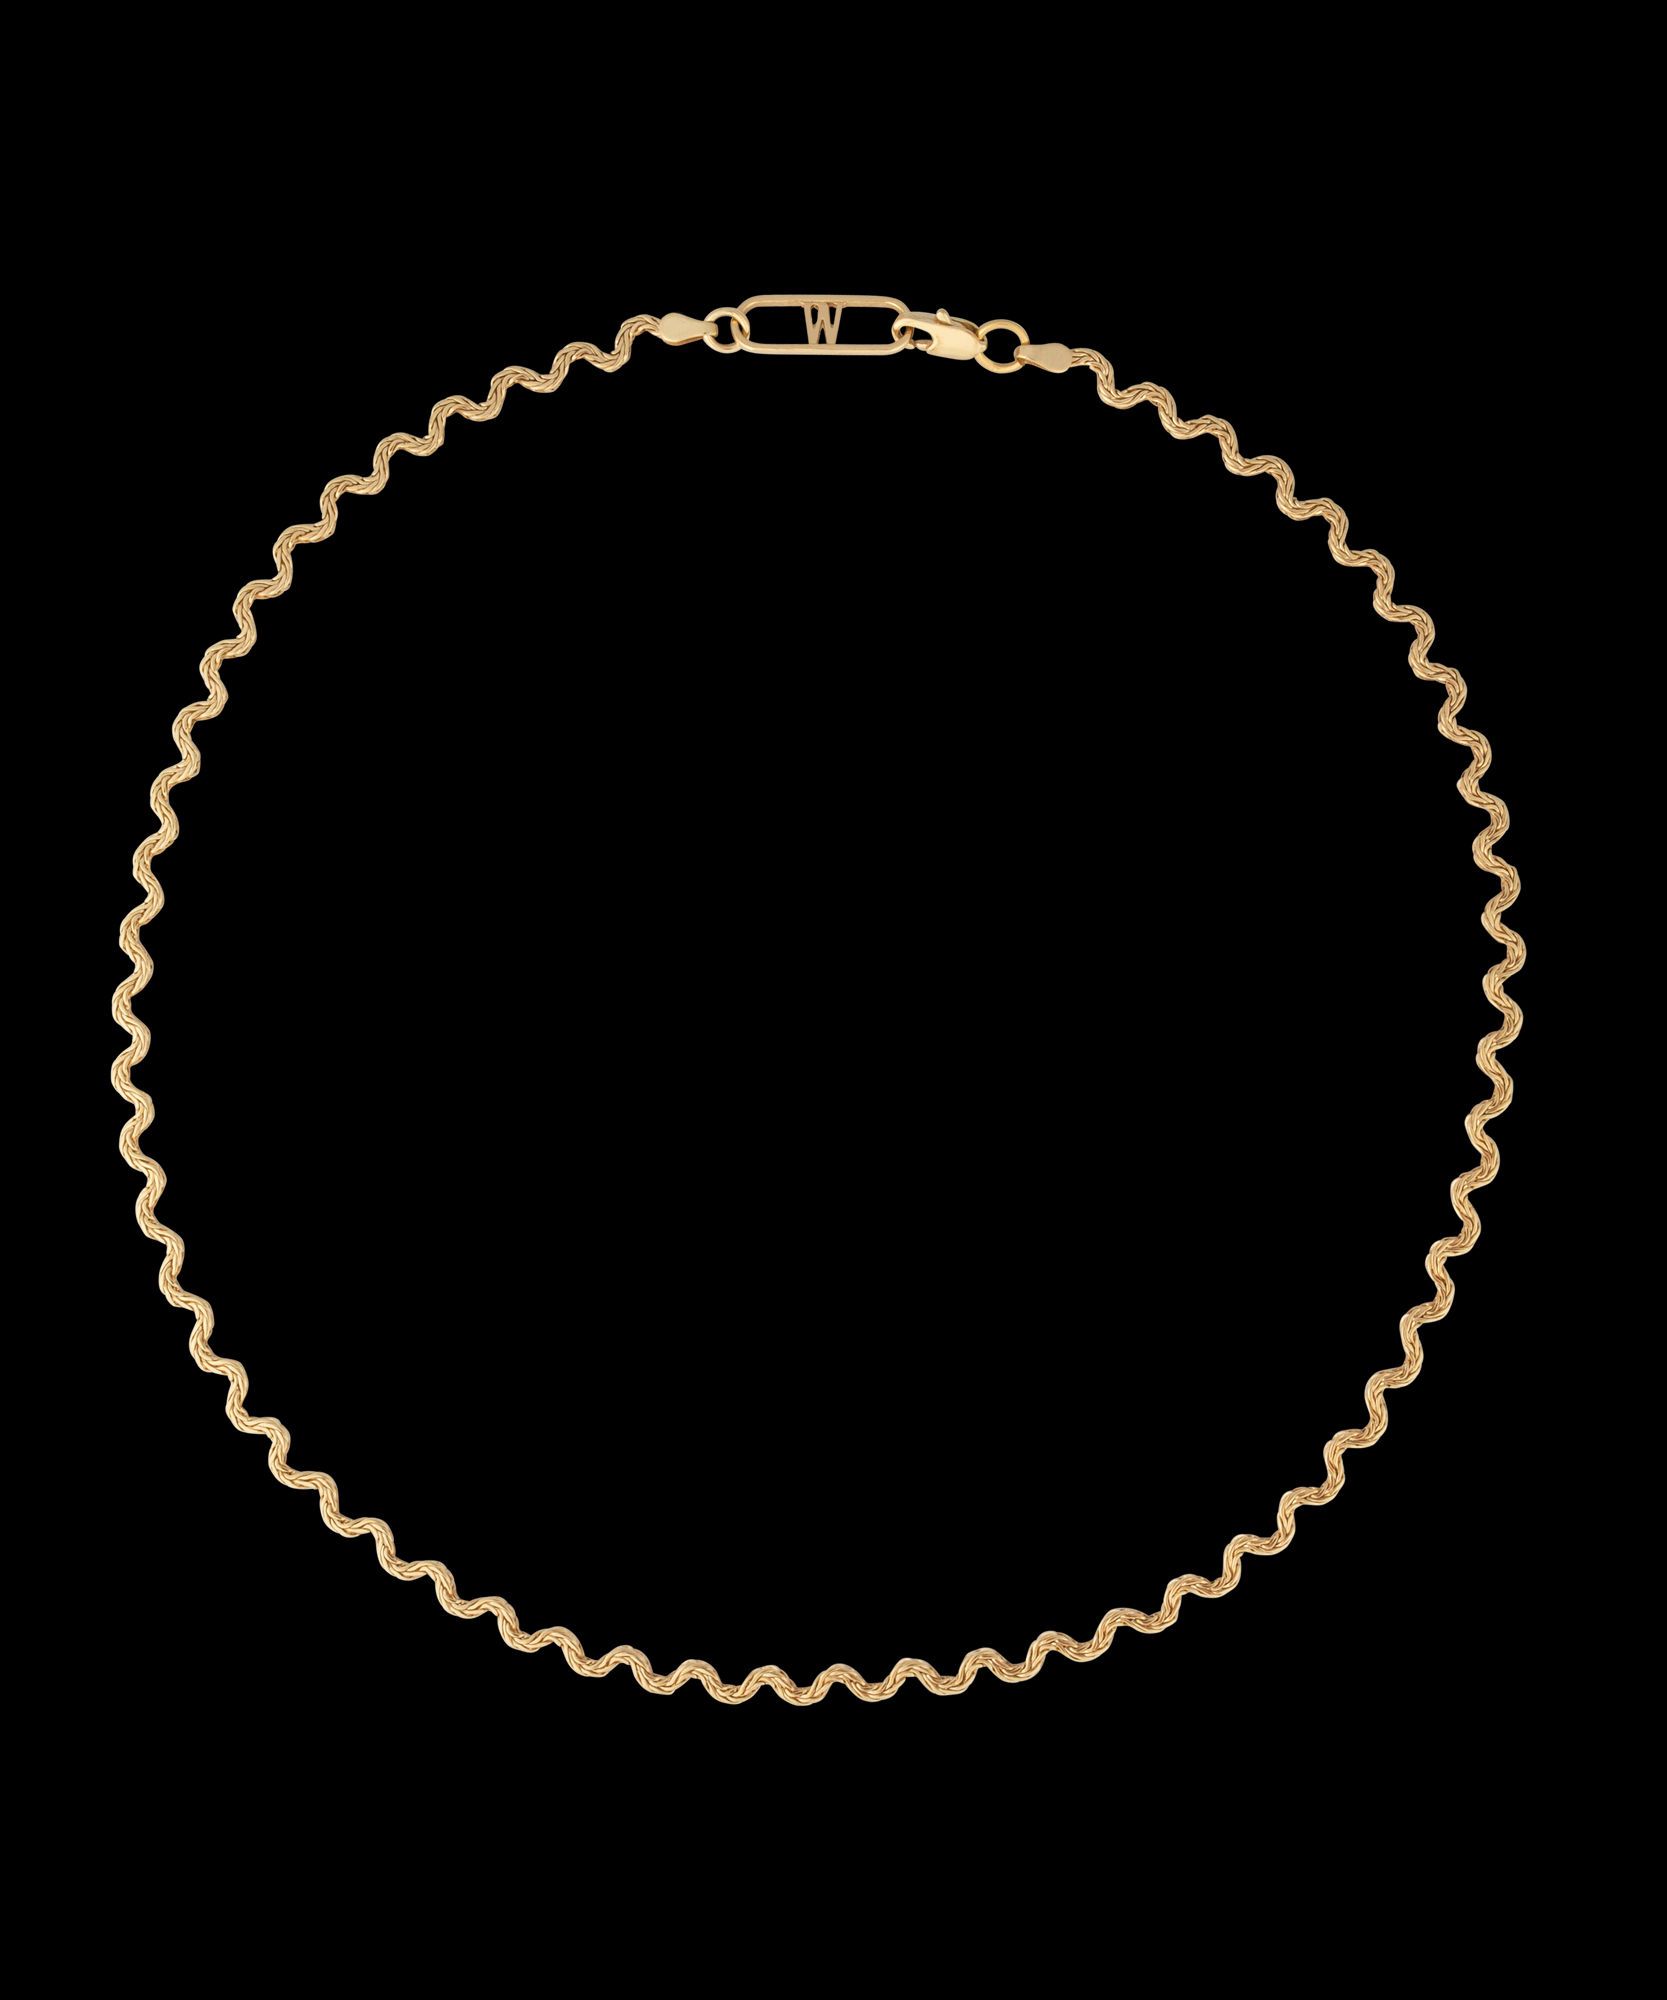 A Berlin-inspired Irina Necklace Gold with a curved design by a renowned jewelry brand.